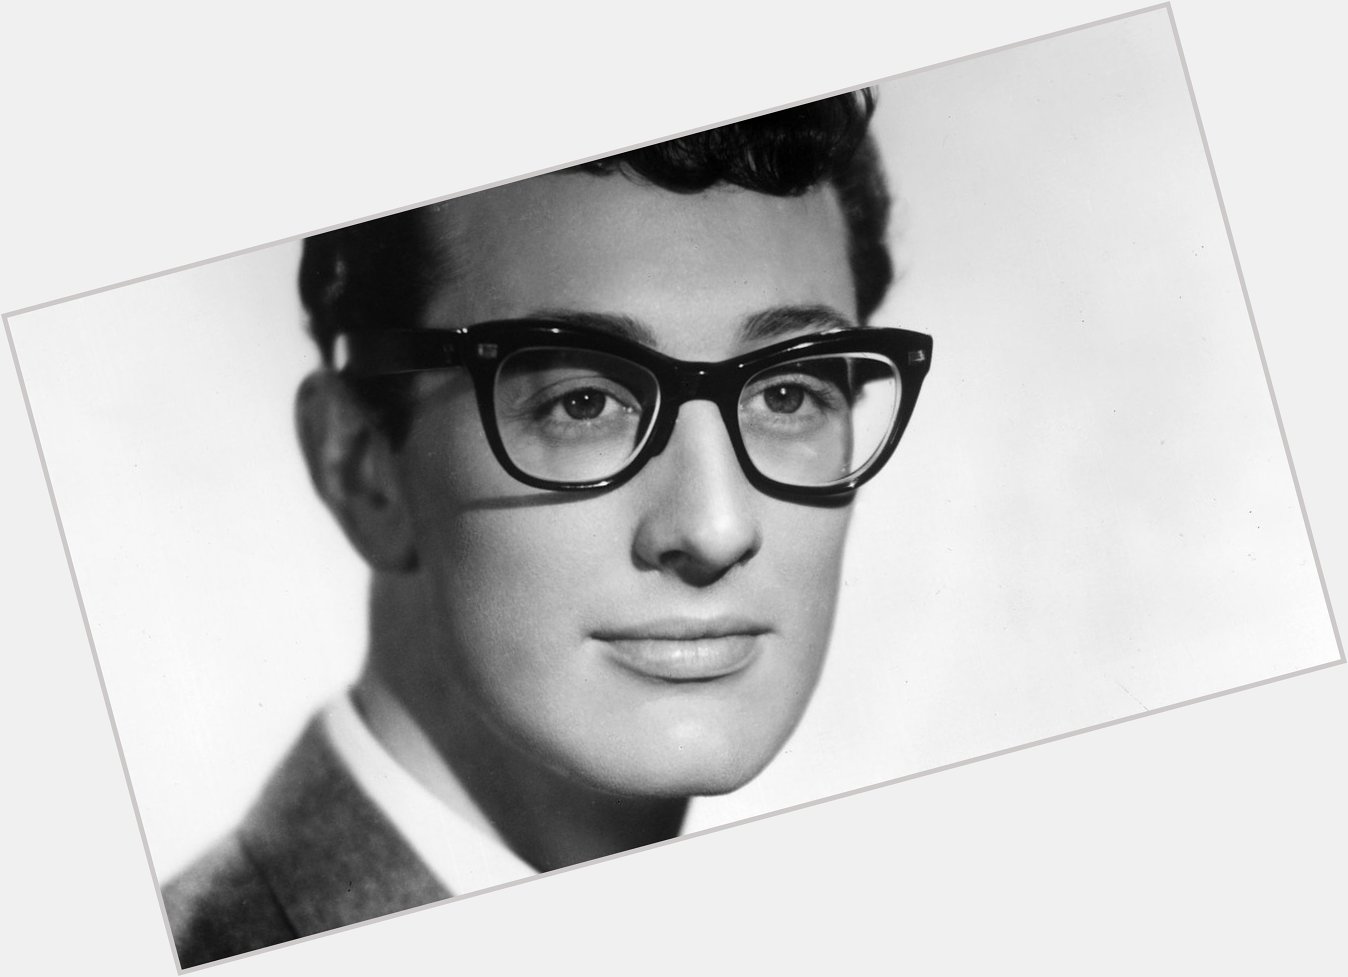 Happy birthday to a famous fellow glasses wearer, Buddy Holly! 